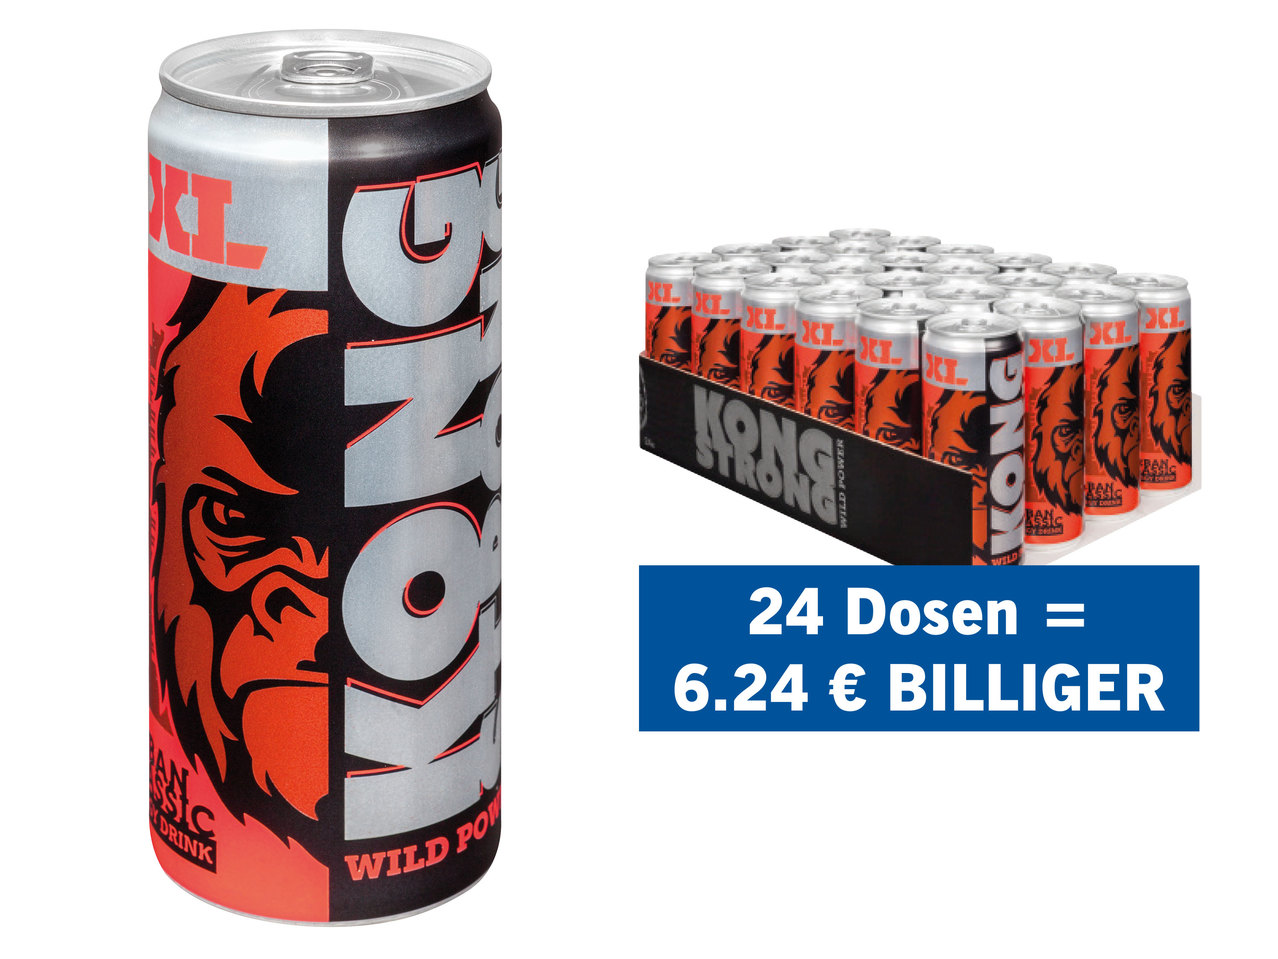 KONG STRONG Energy Drink XL